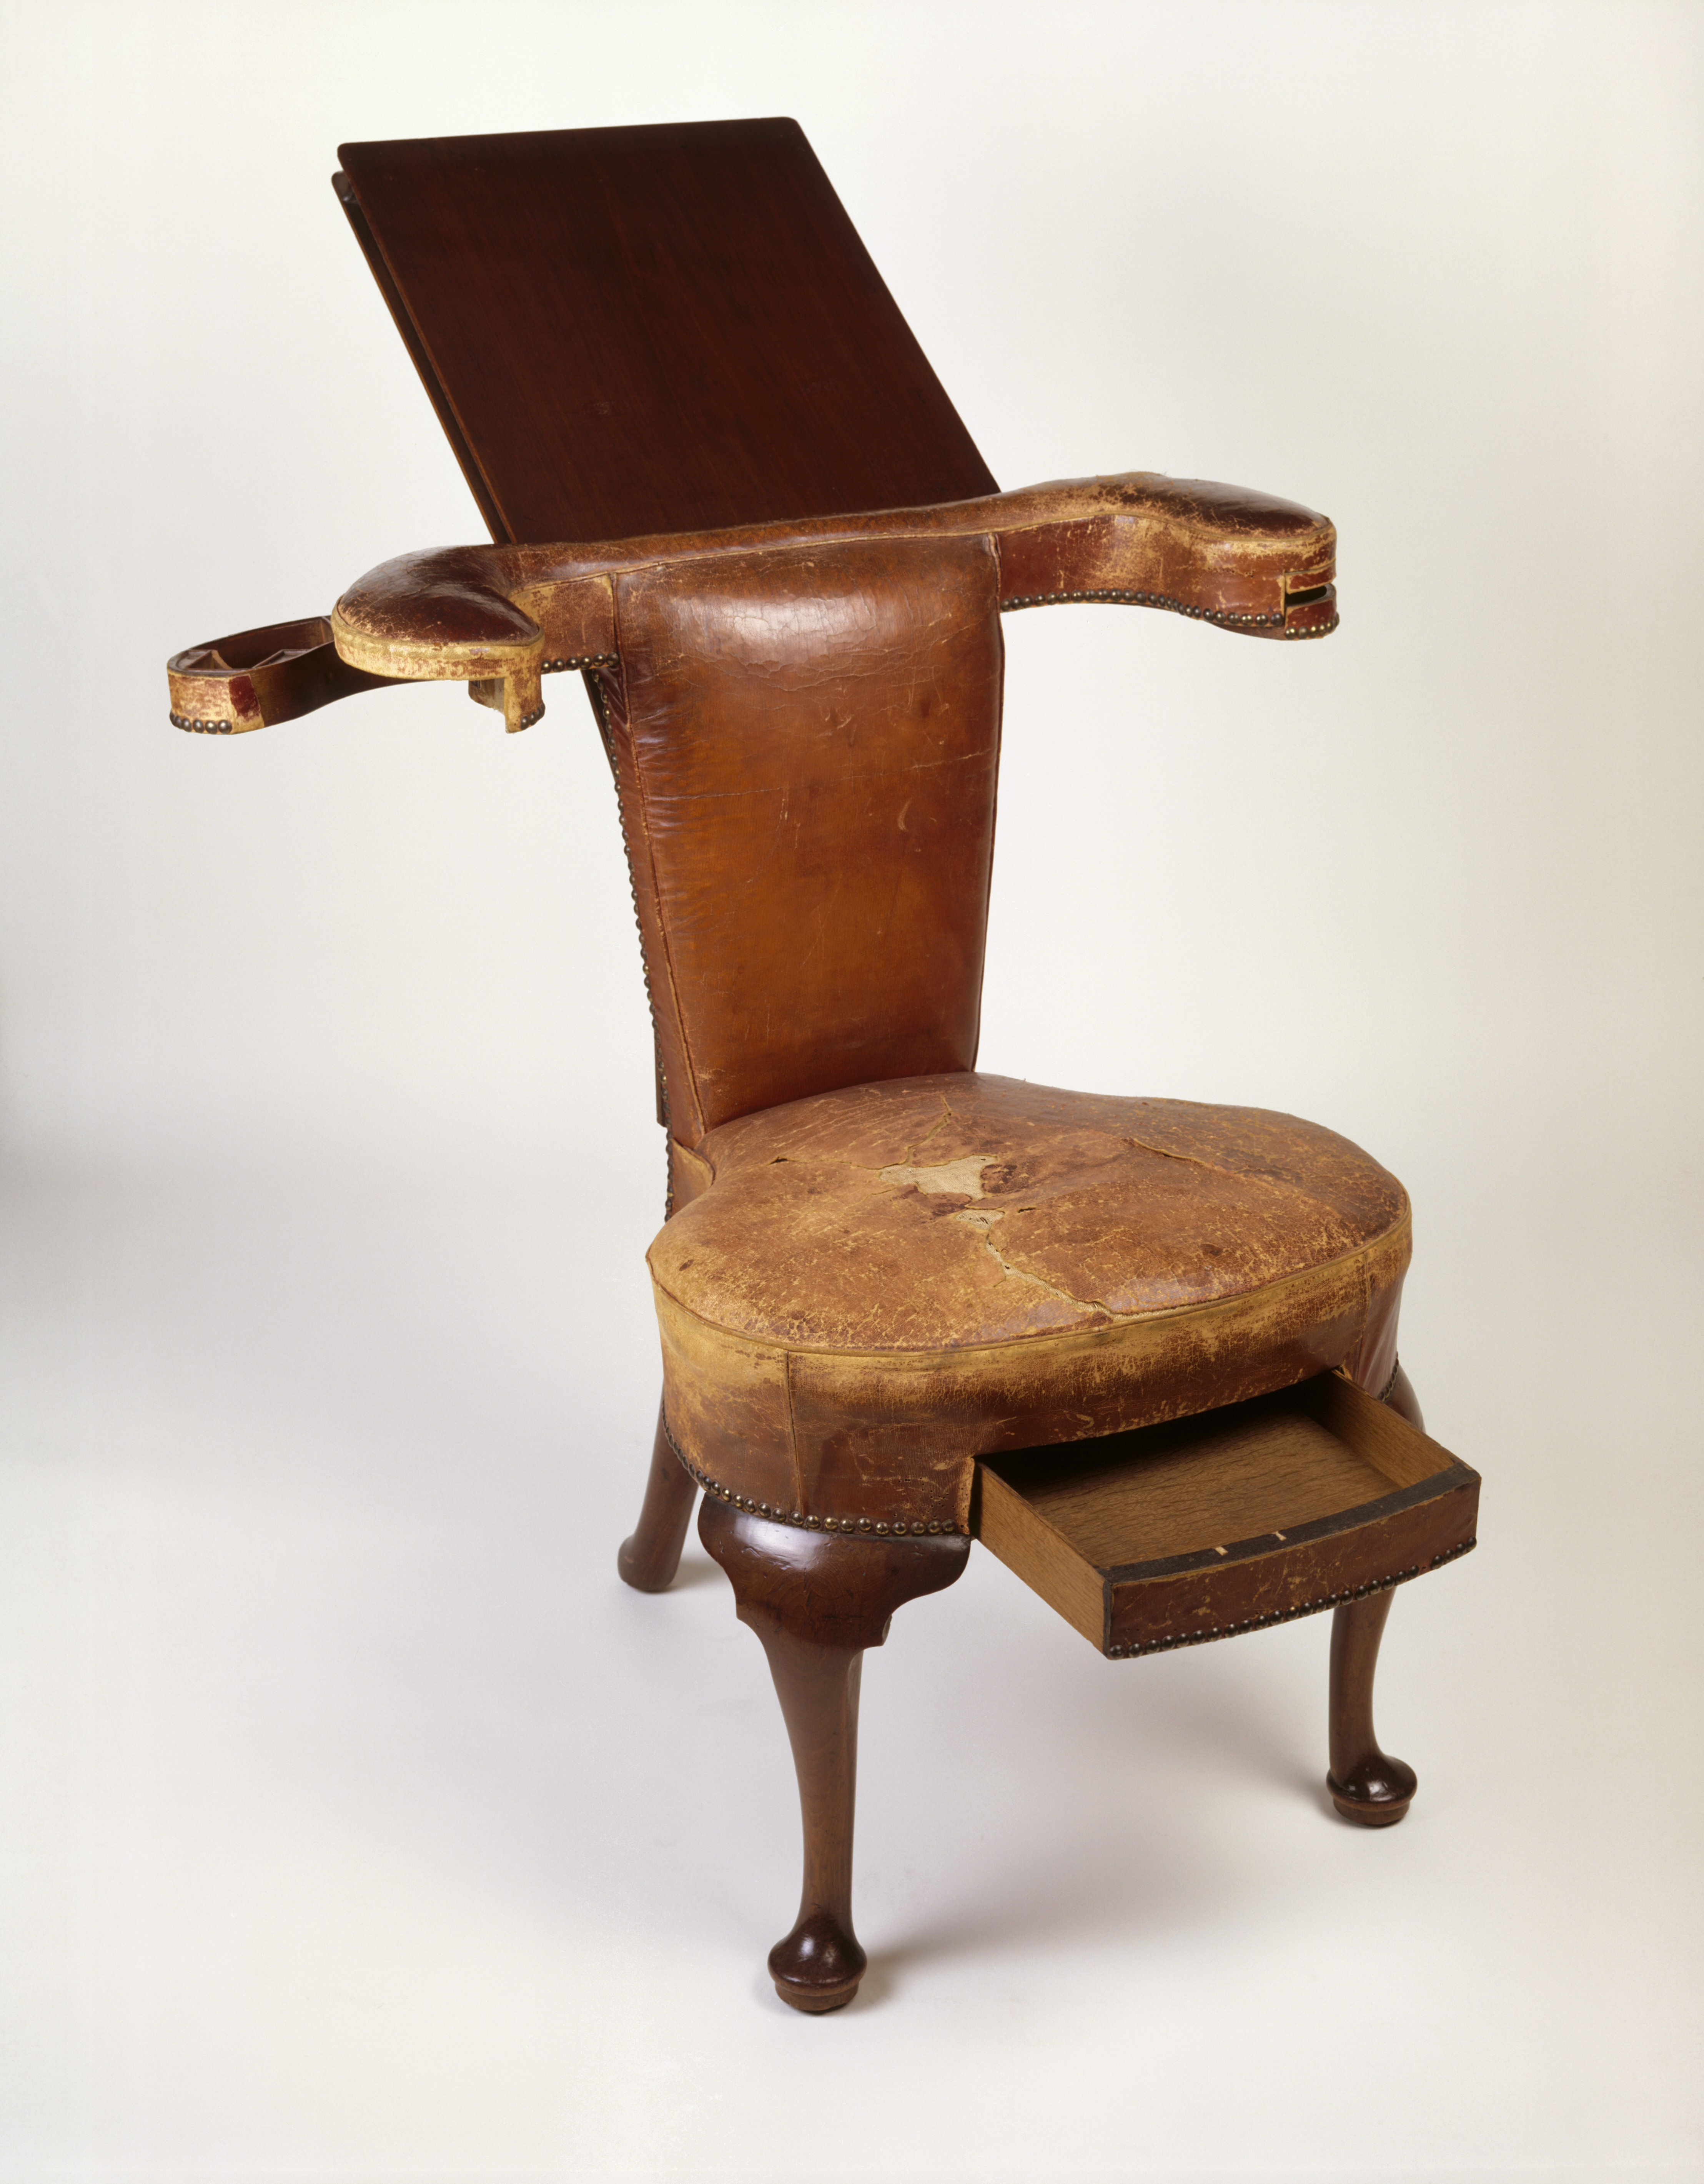 Small leather chair with a drawer in the seat and a book rest at the top.